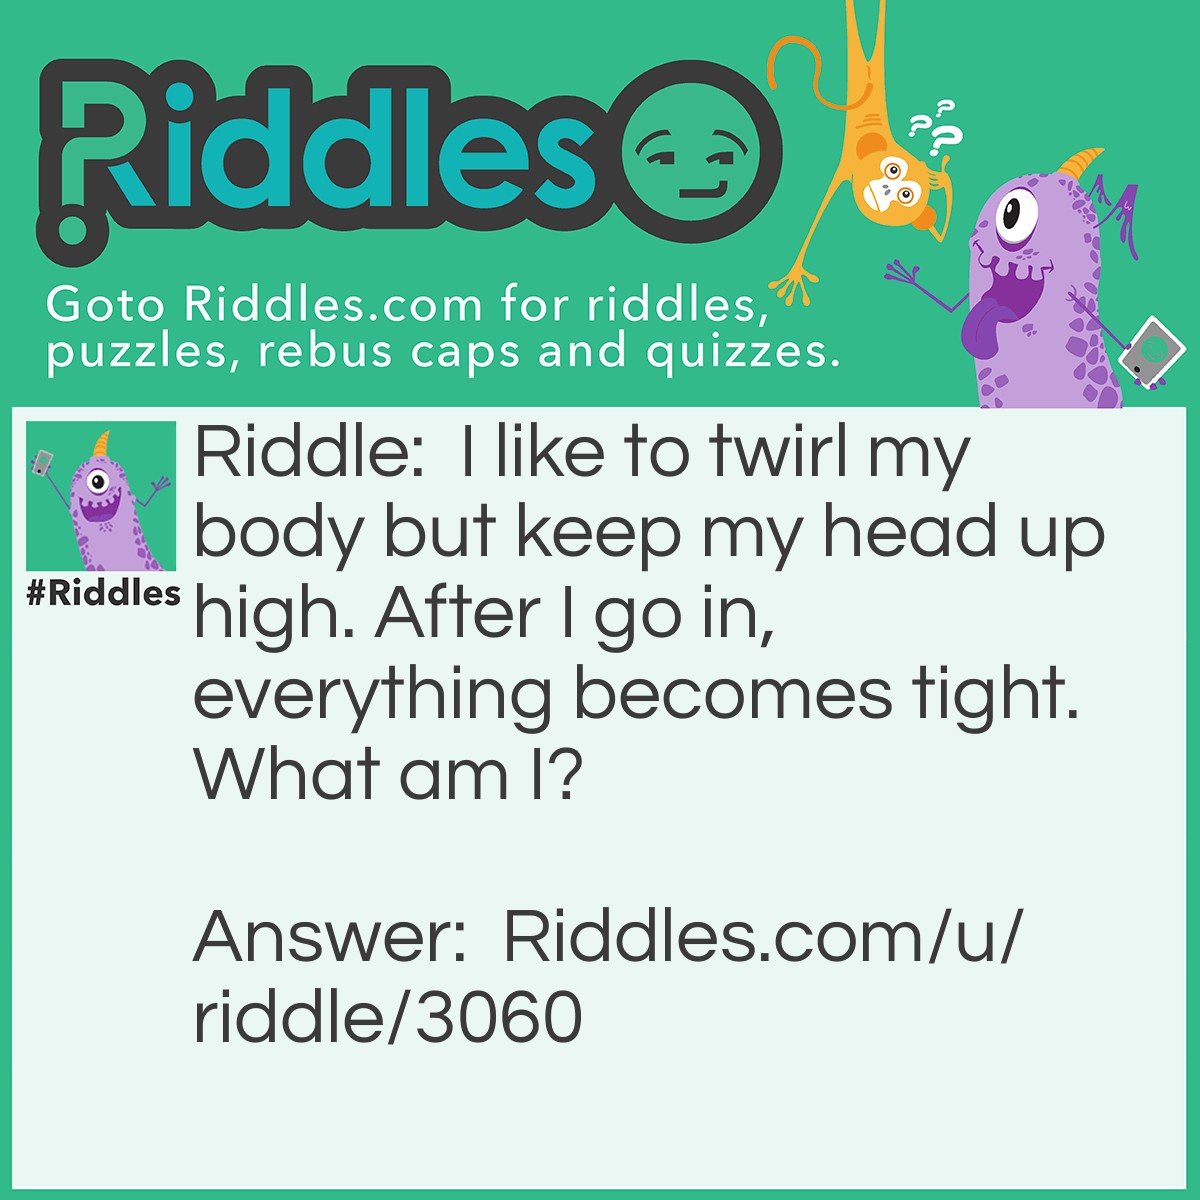 Riddle: I like to twirl my body but keep my head up high. After I go in, everything becomes tight. What am I? Answer: Screw